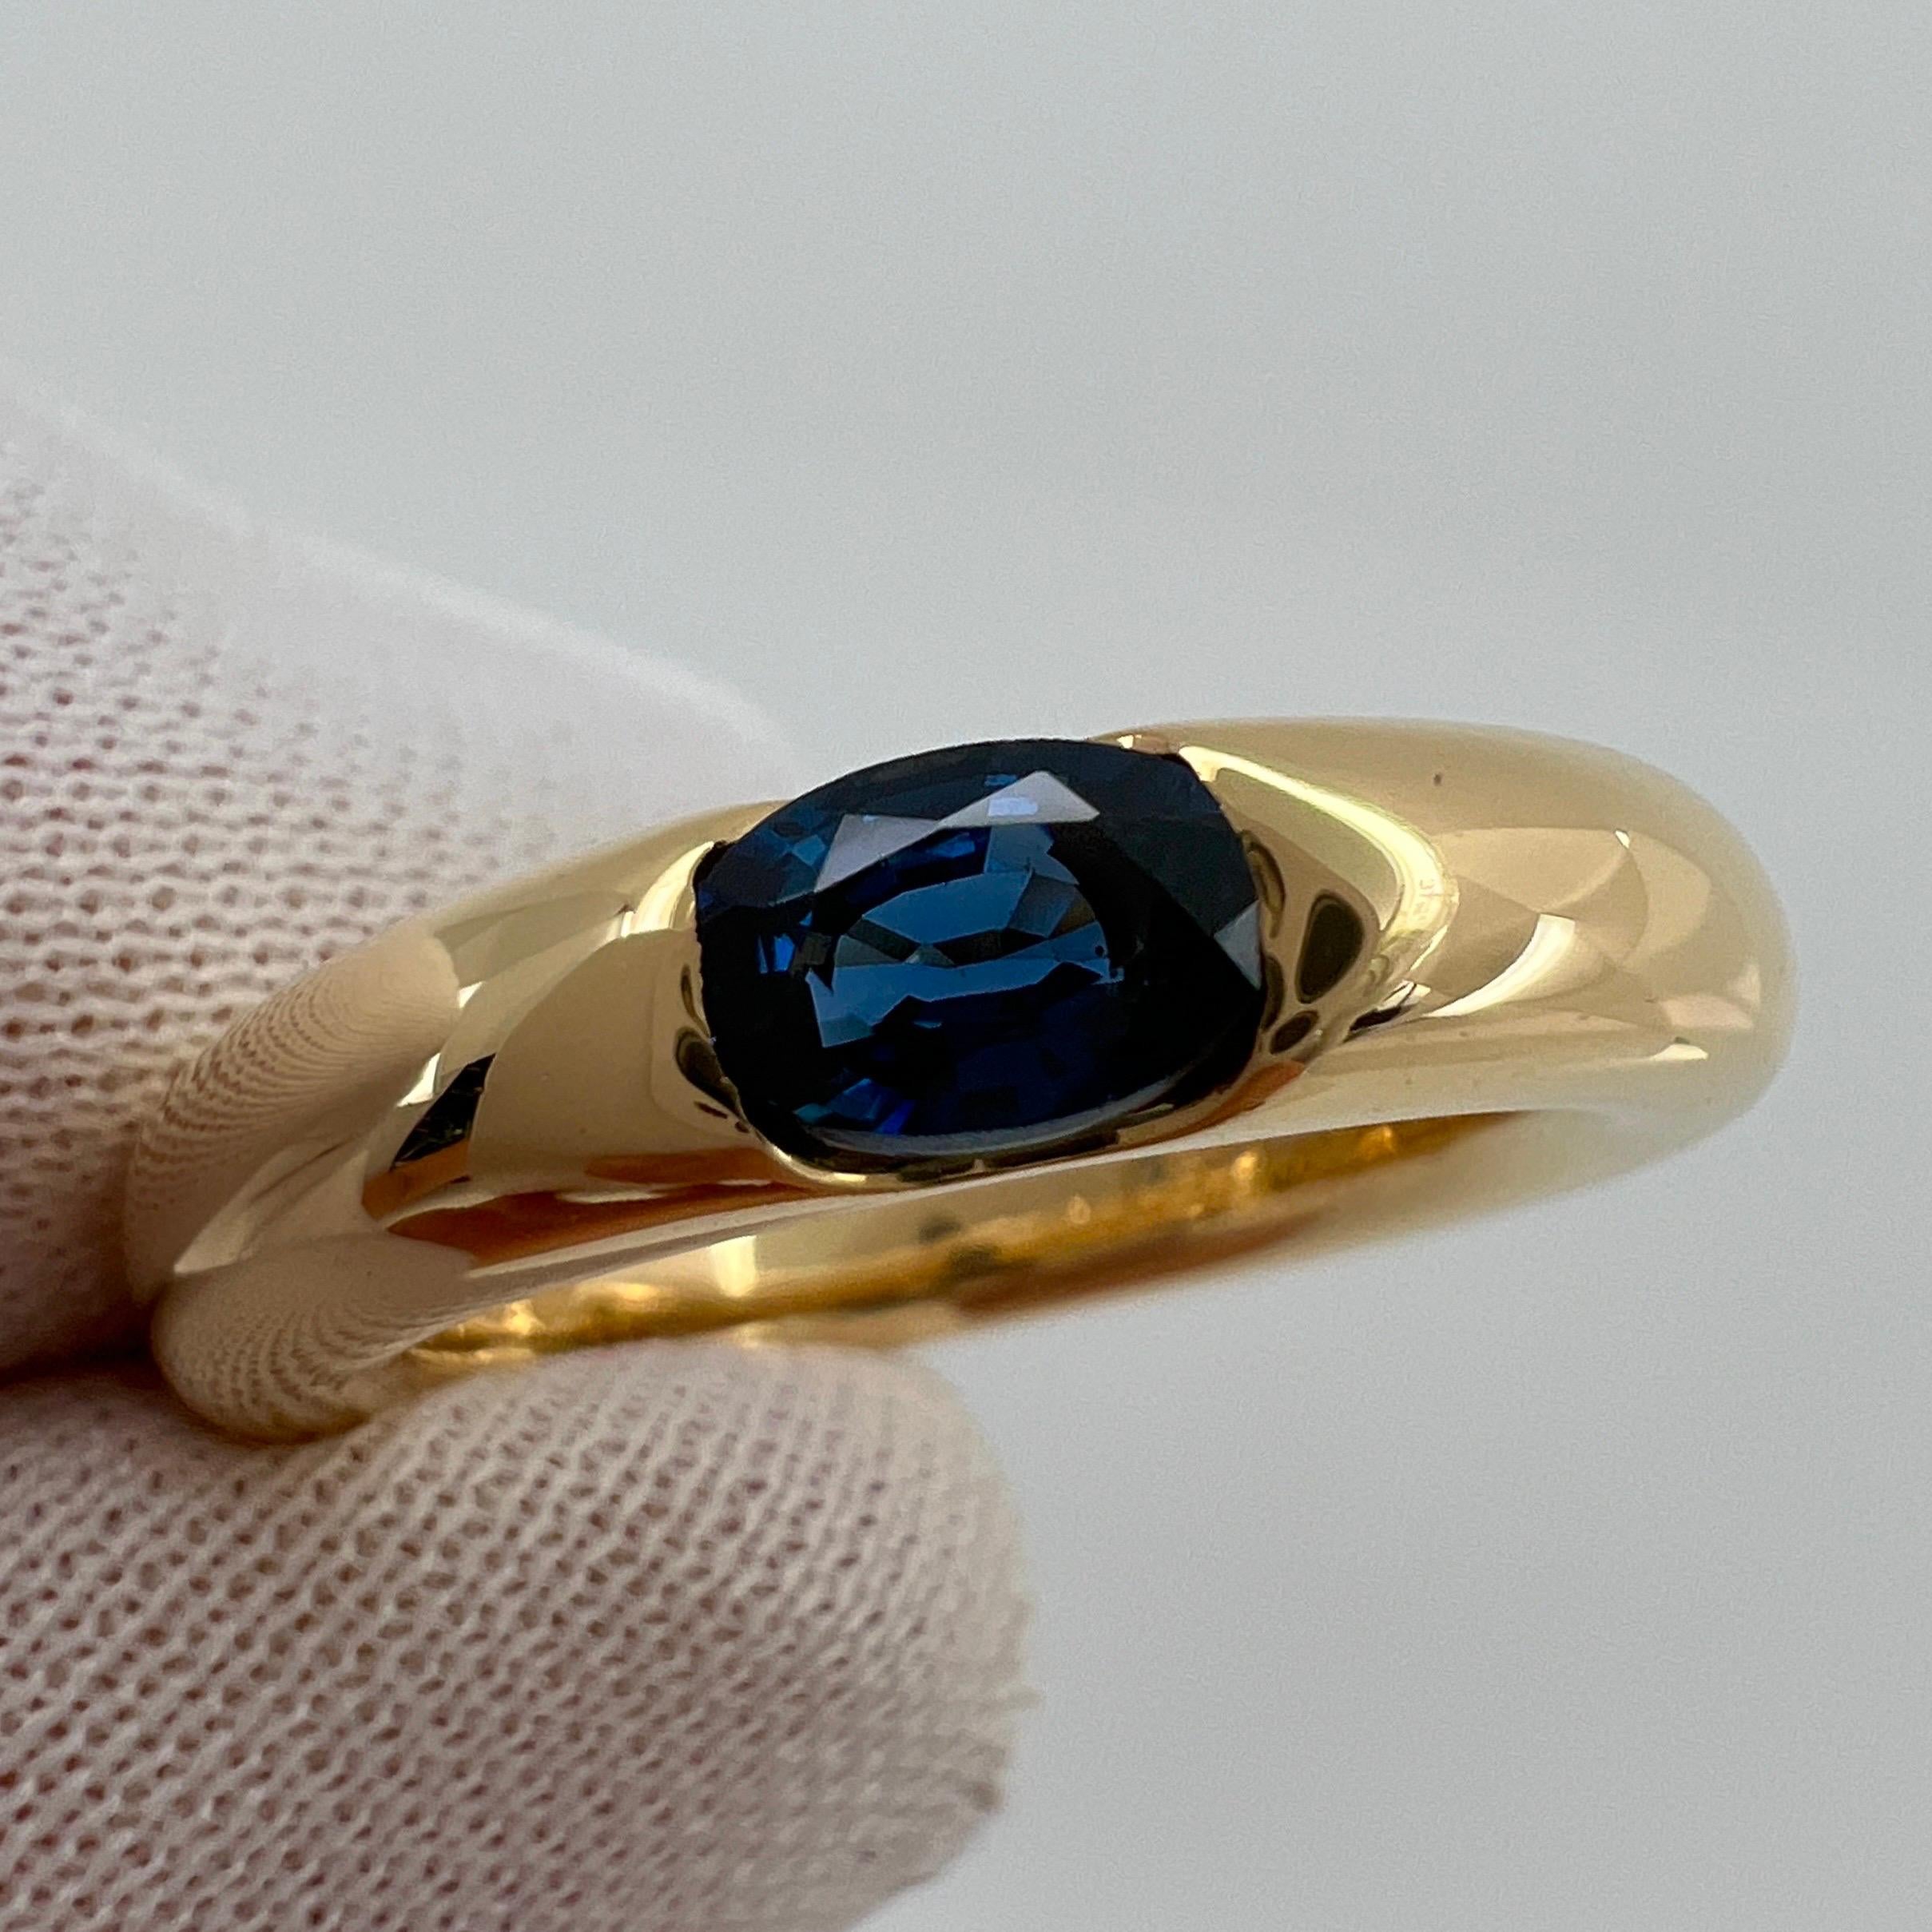 Vintage Cartier Deep Blue Sapphire Oval Ellipse 18k Yellow Gold Solitaire Ring 4